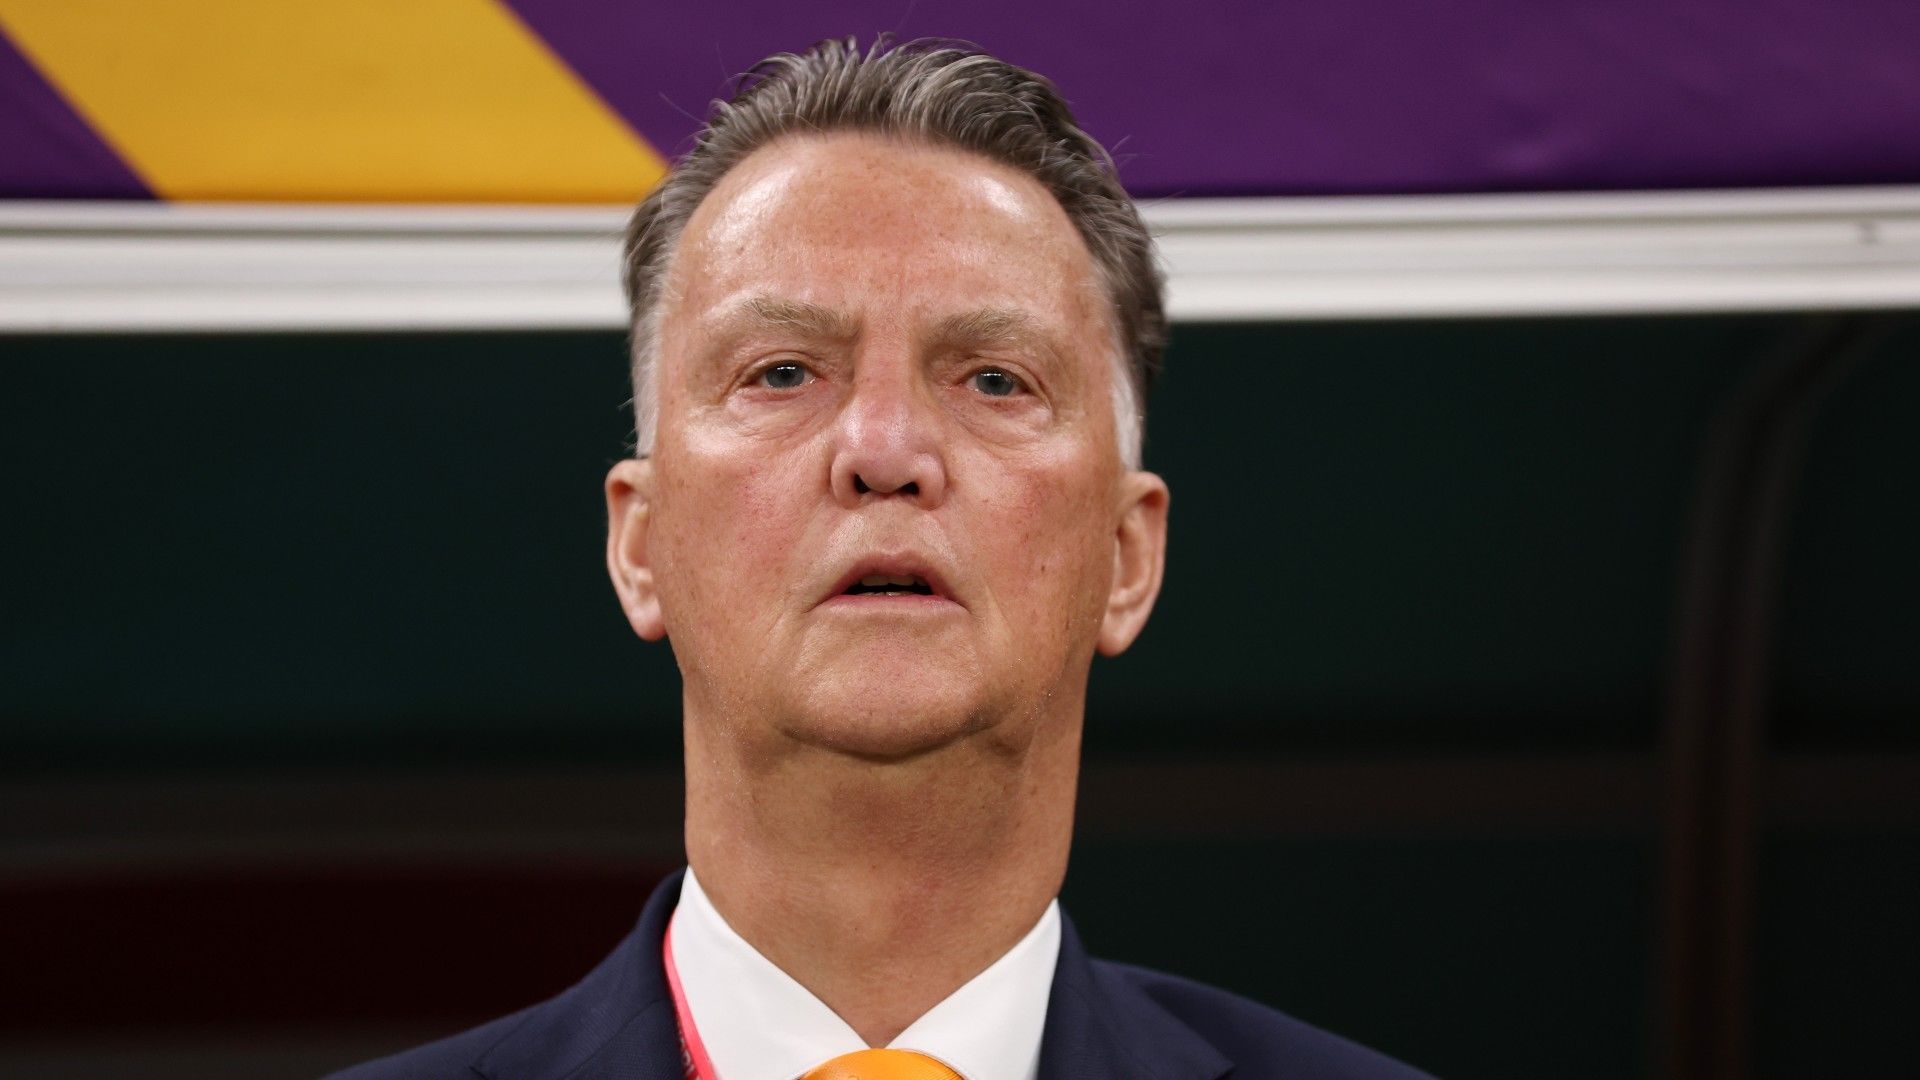 Van Gaal confirms his resignation as head coach of the Netherlands after the defeat in quarterfinals of World Cup 2022